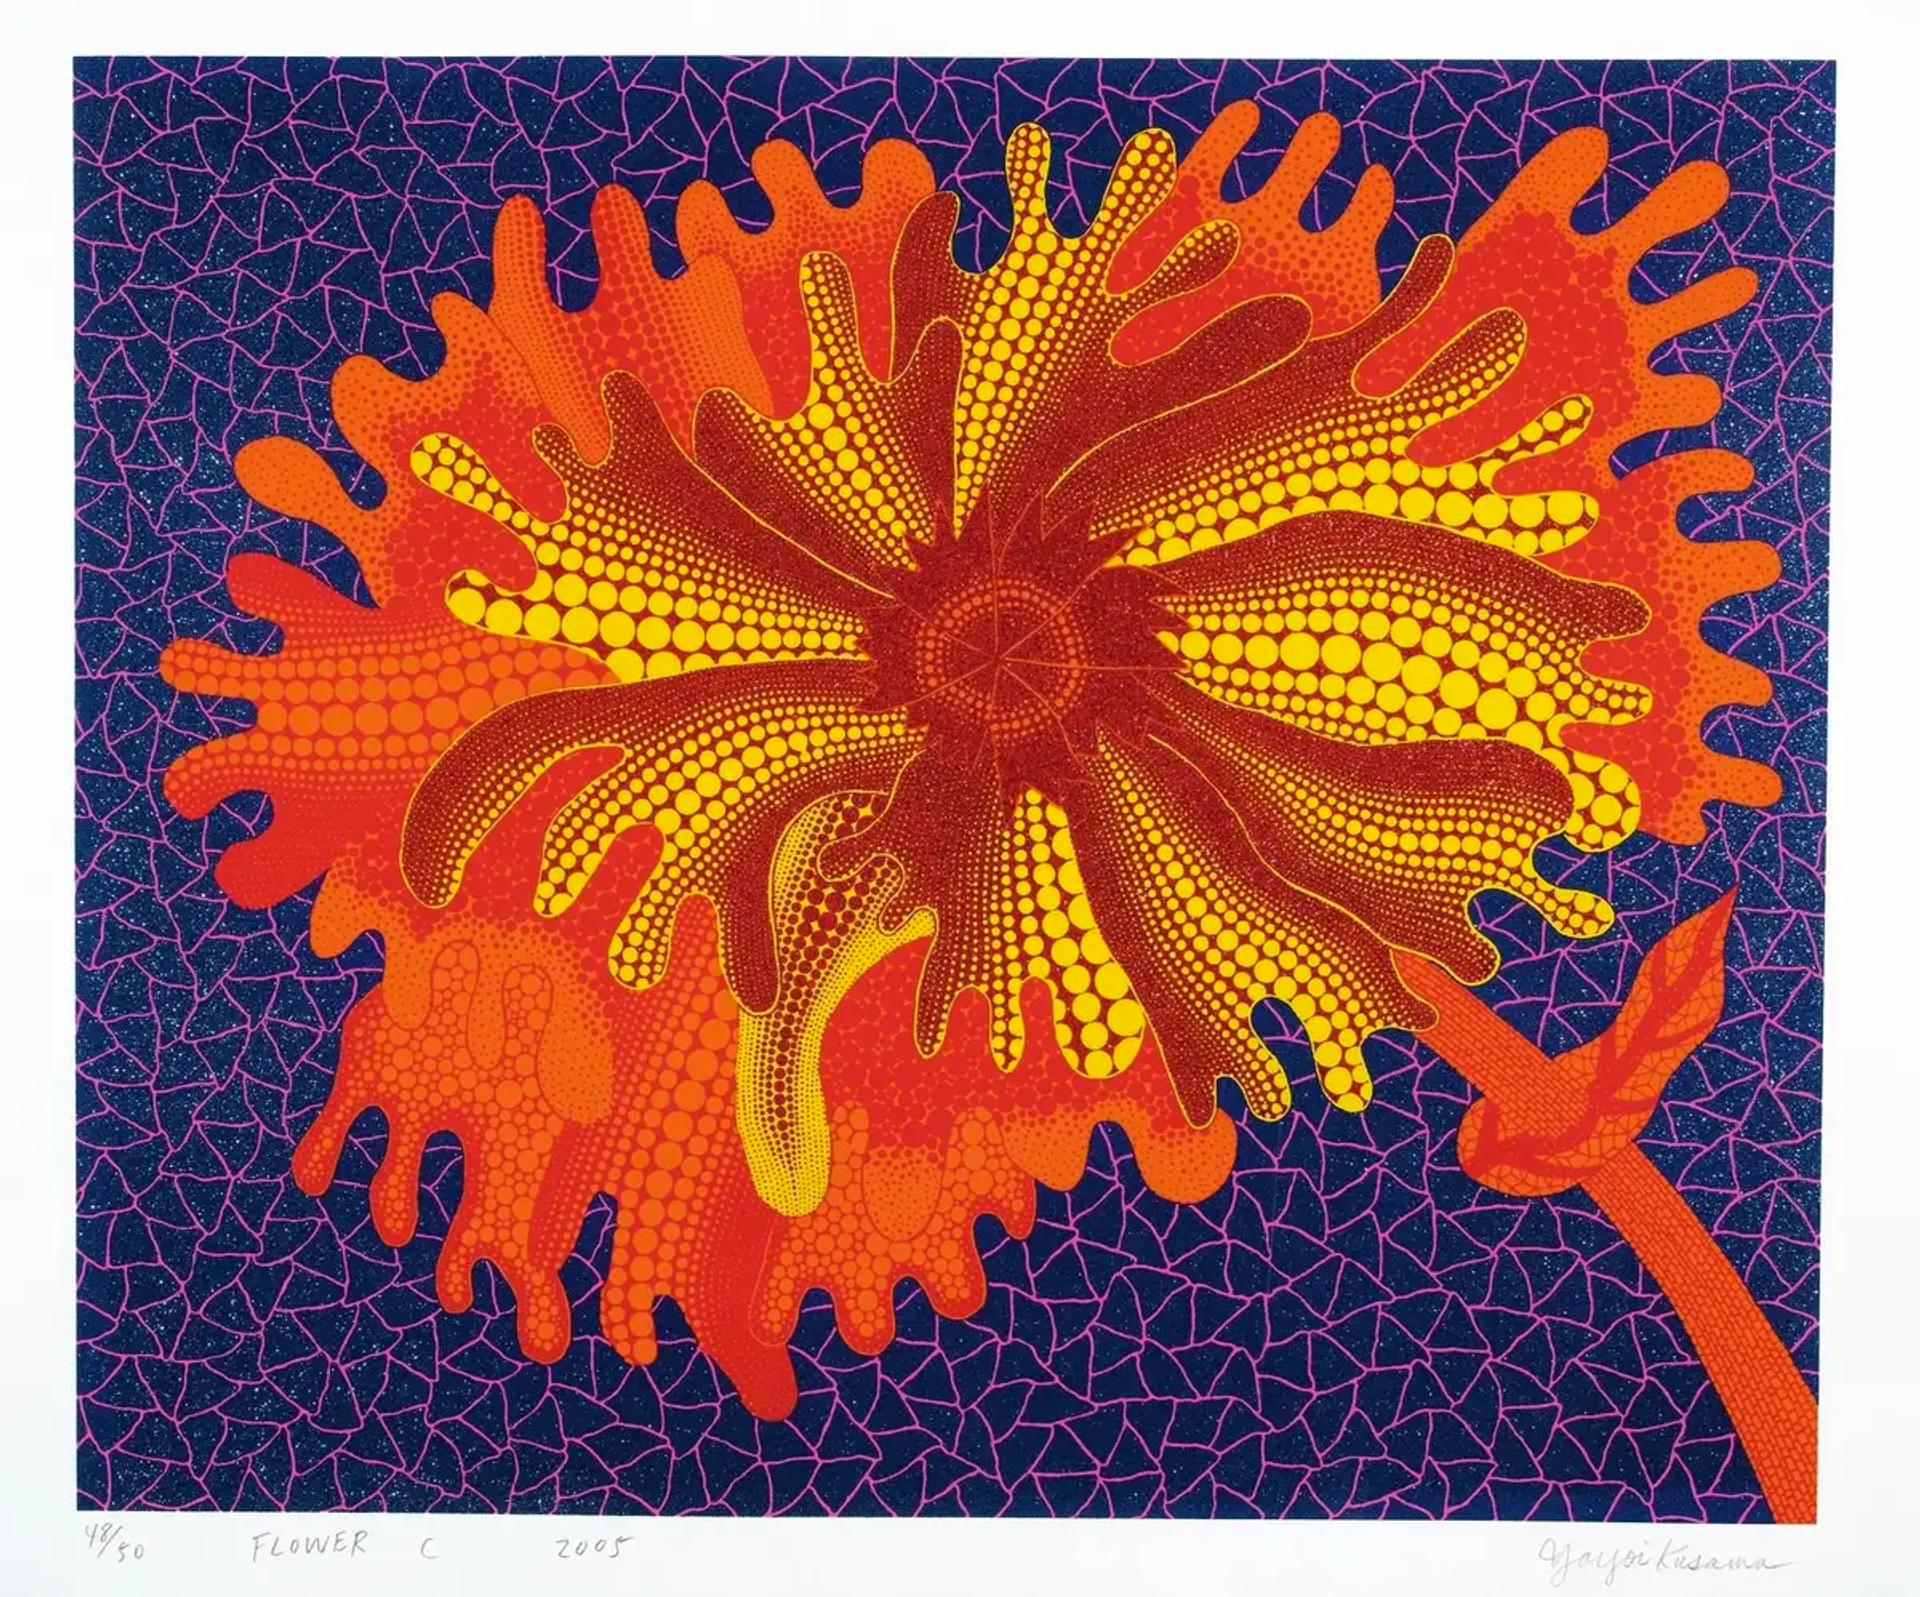 Yayoi Kusama’s Flower C. A screenprint of a flower made of orange, red, and yellow polka dots against a blue and purple geometric background.